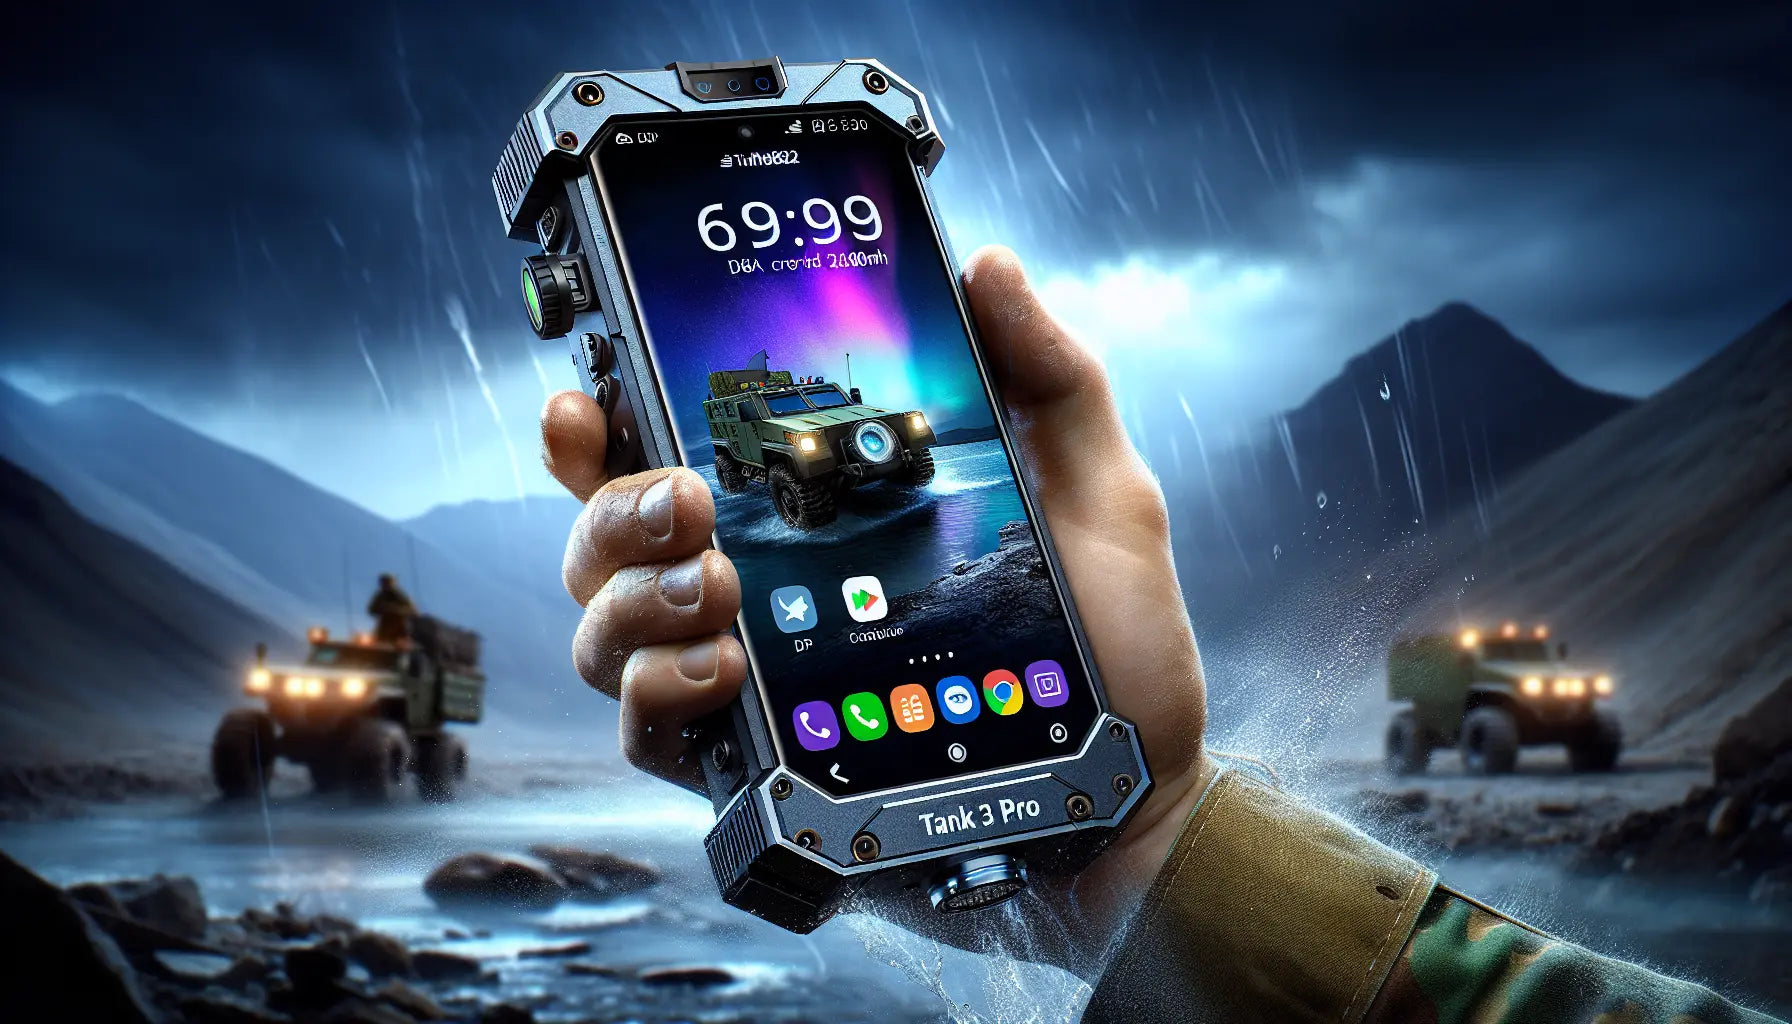 UNIHERTZ 8849 Tank 3 Pro 5G Rugged Smartphone - Review Full Specifications